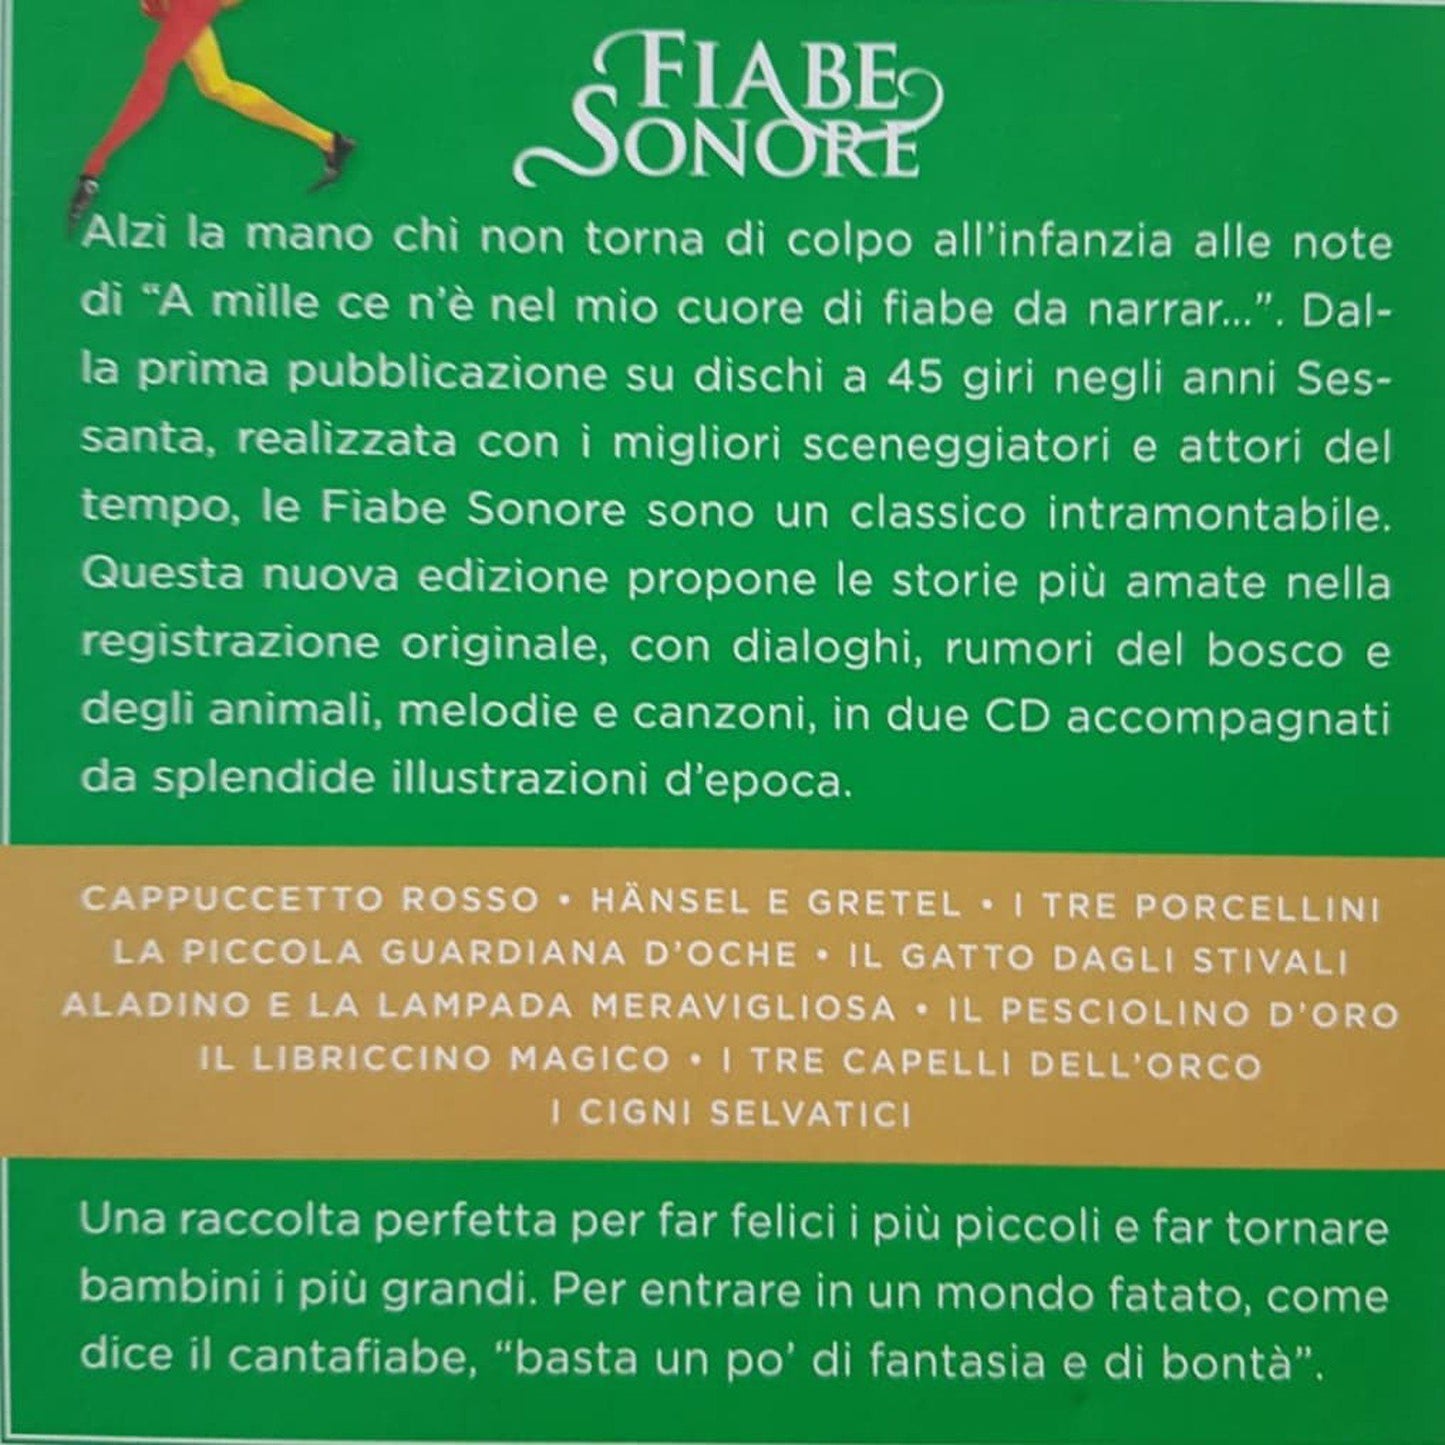 FIABE SONORE A Mille ce n'e. - VOLUME SECONDO Very Good, 4+ Yrs Olga  (6582235791545)